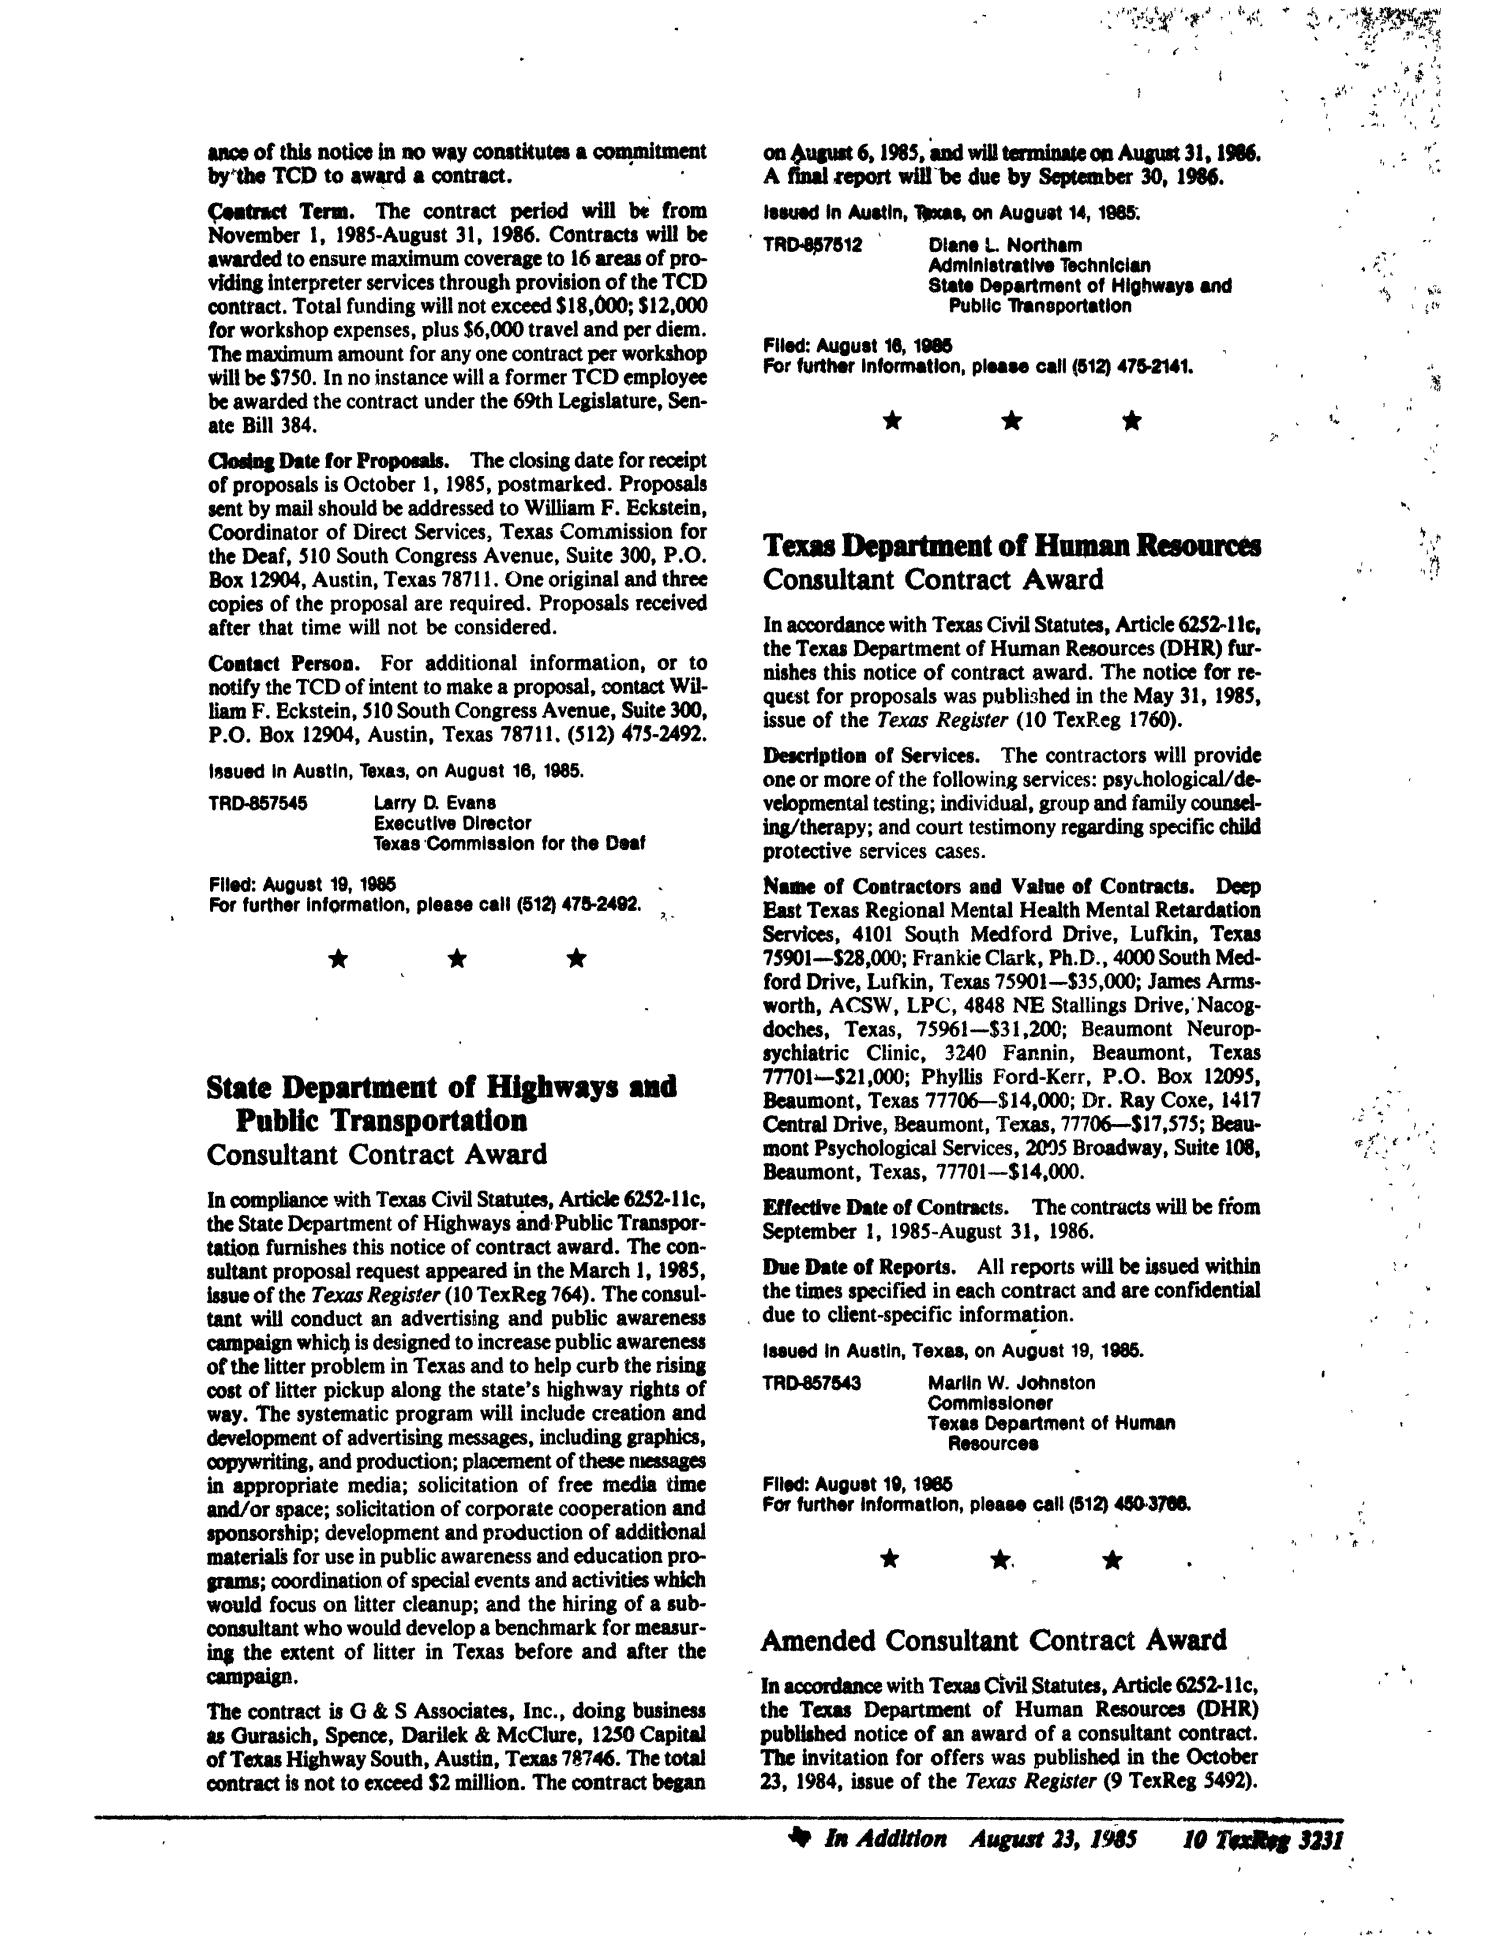 Texas Register, Volume 10, 63, Pages 3197-3236, August 23, 1985
                                                
                                                    3231
                                                